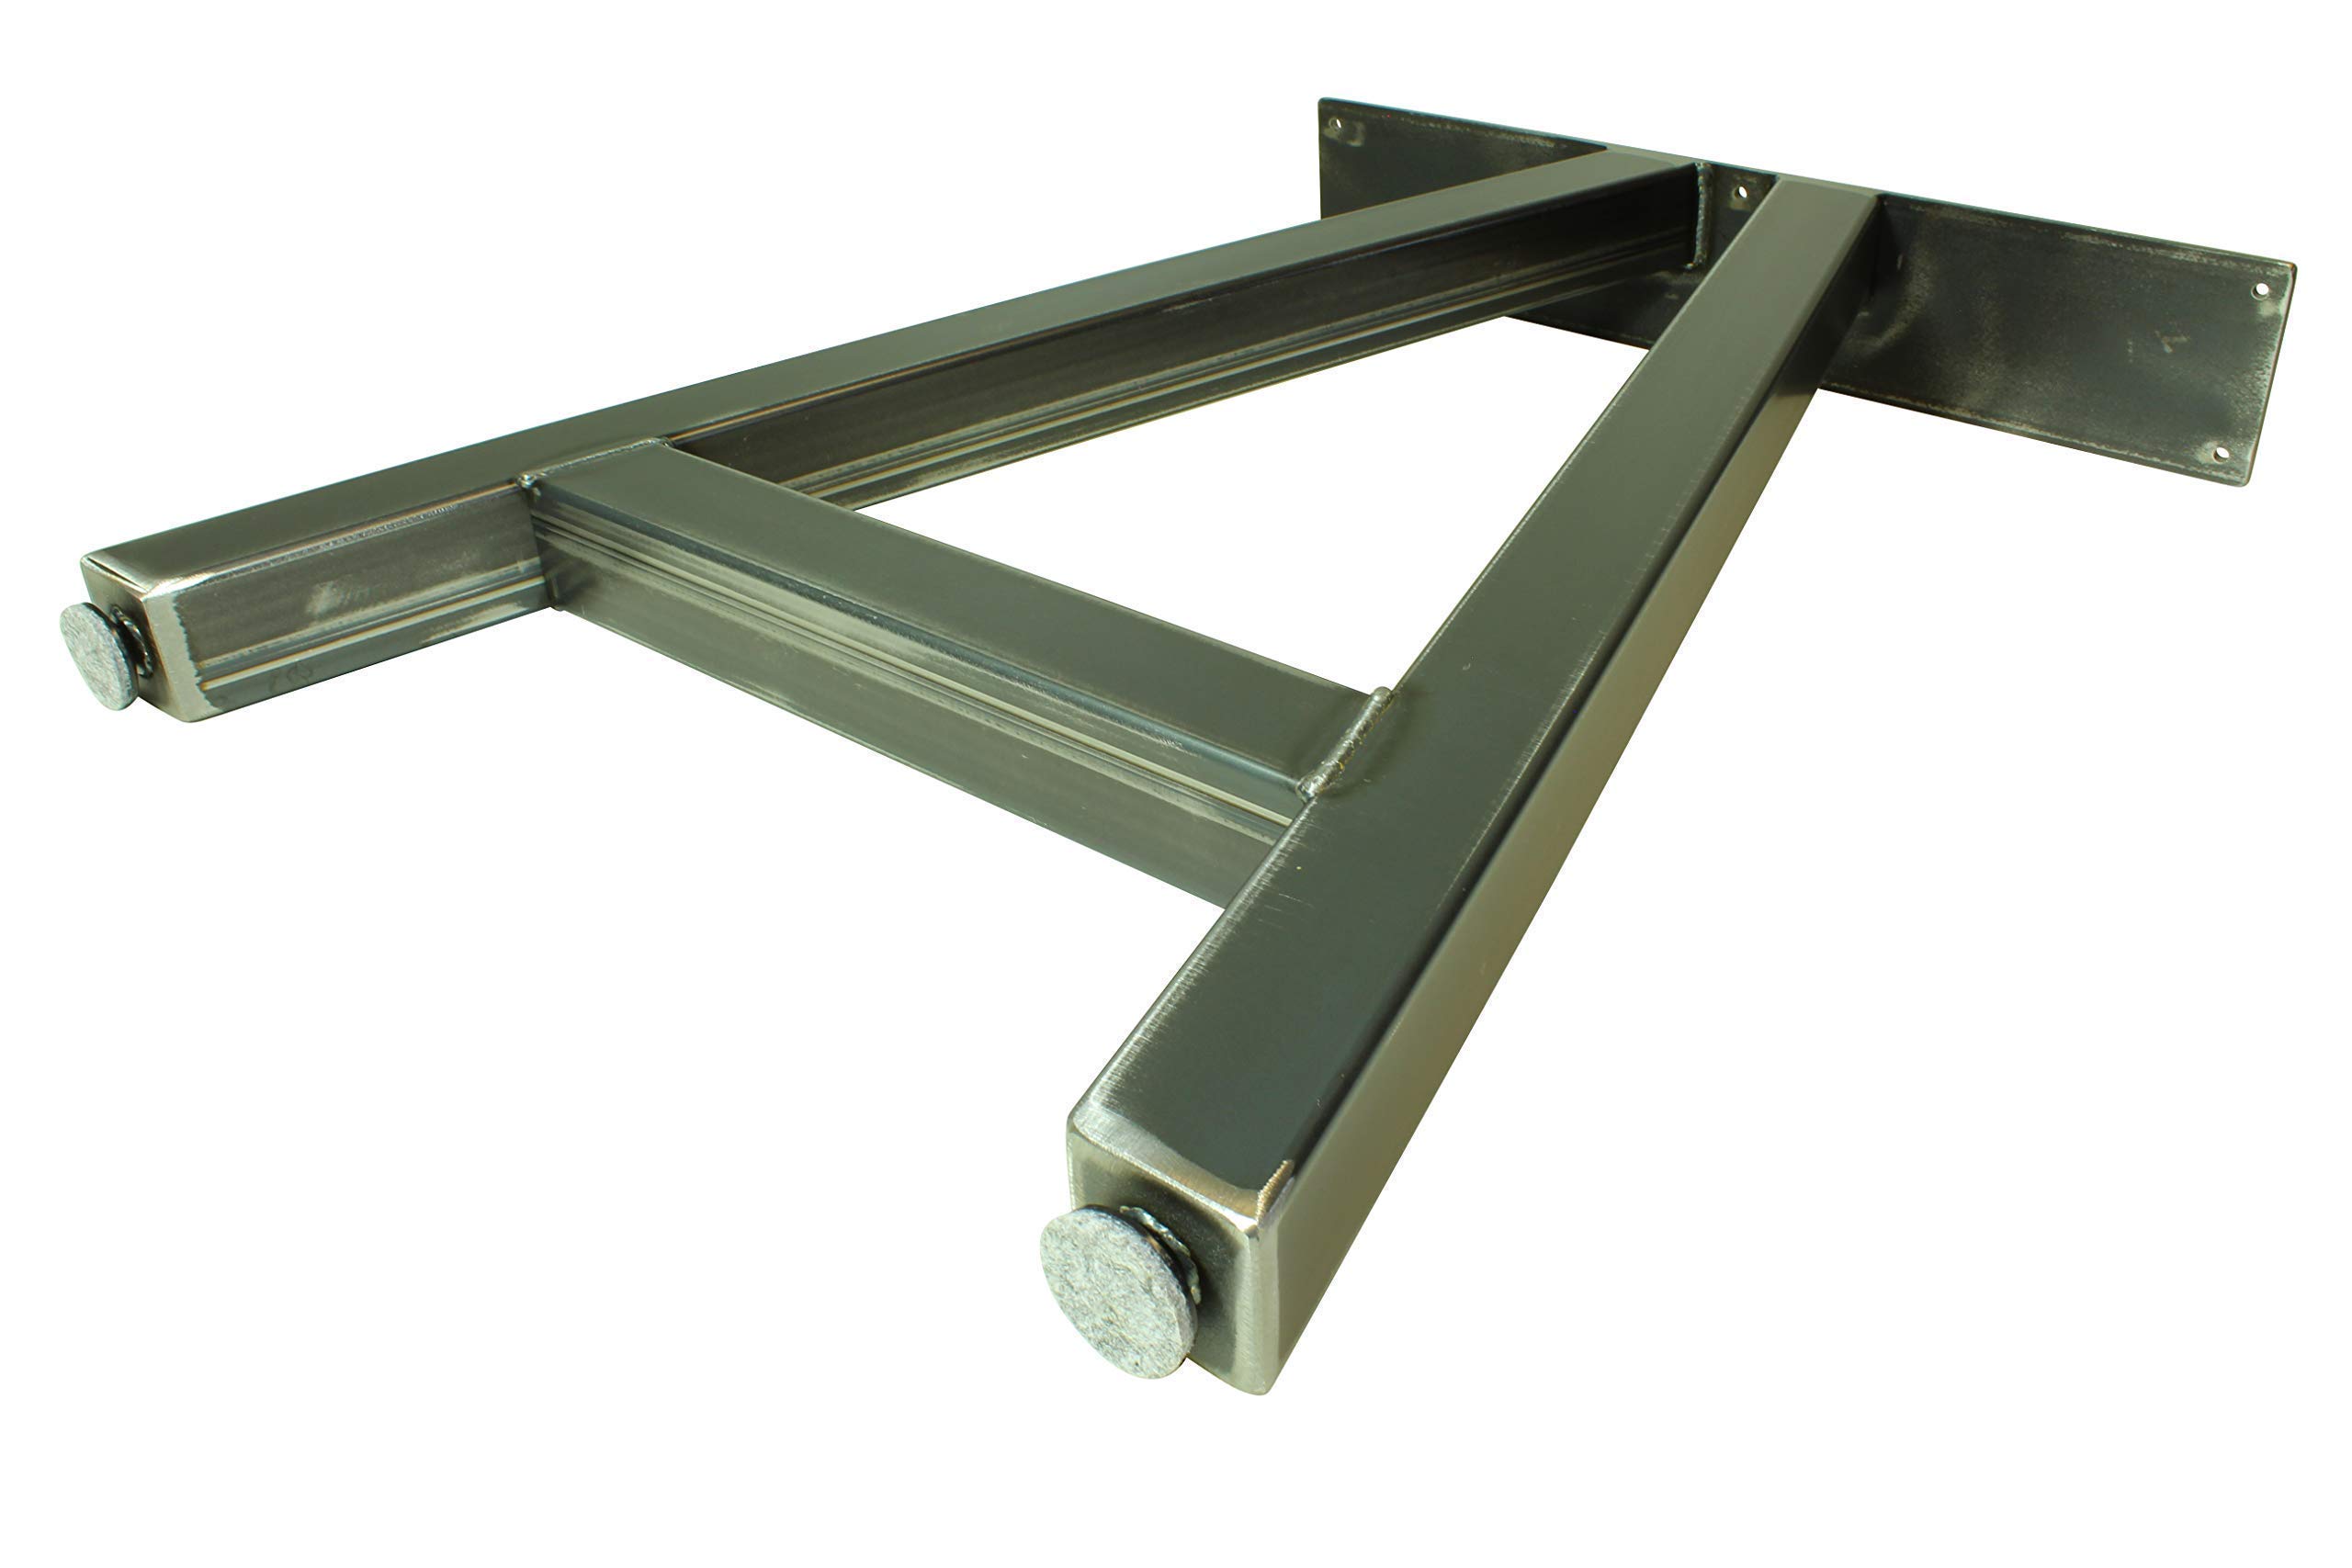 Metal Table Legs - A Frame Style - Distressed Steel Finish